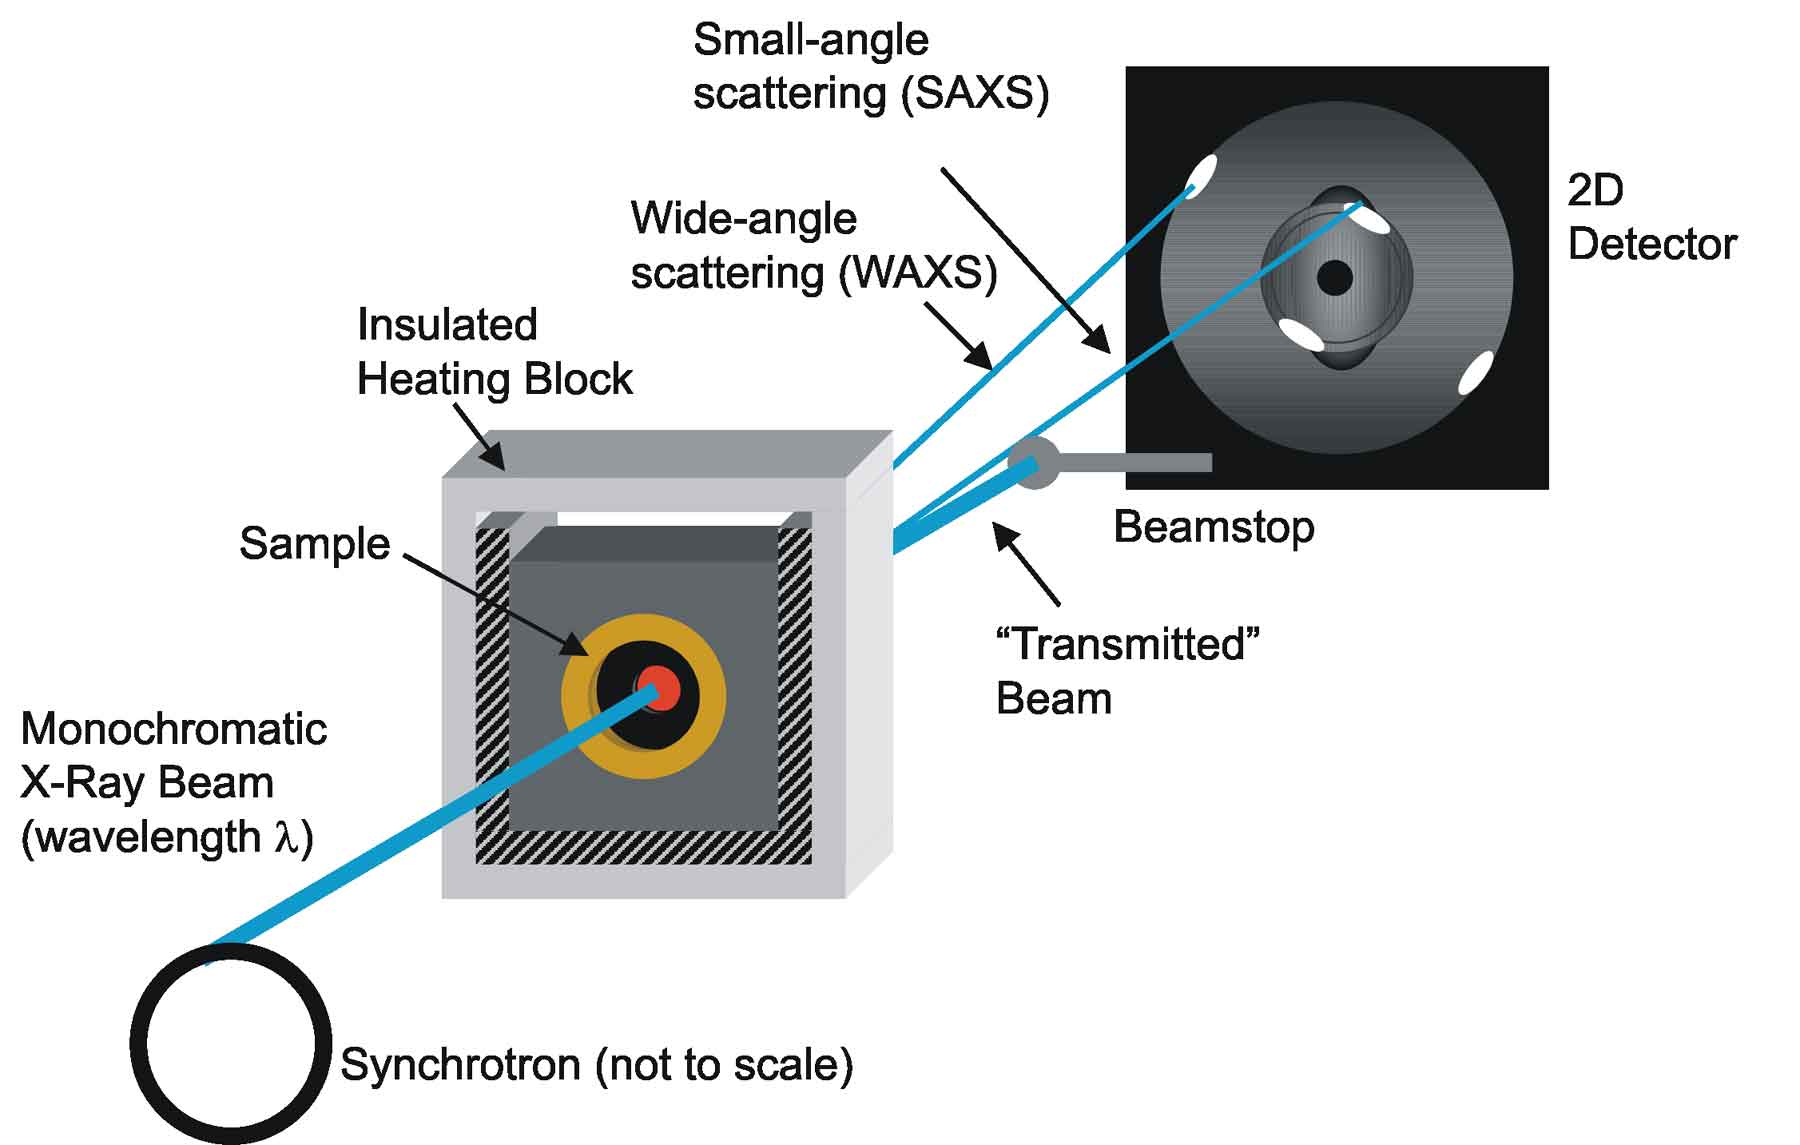 X-rays from a synchrotron radiation source impinge upon a sample contained in an environmental chamber.  Scattering of the X-rays by small angles due to nanoscale structures is measured in SAXS, whereas larger angle scattering due to smaller length scale features is observed in WAXS.